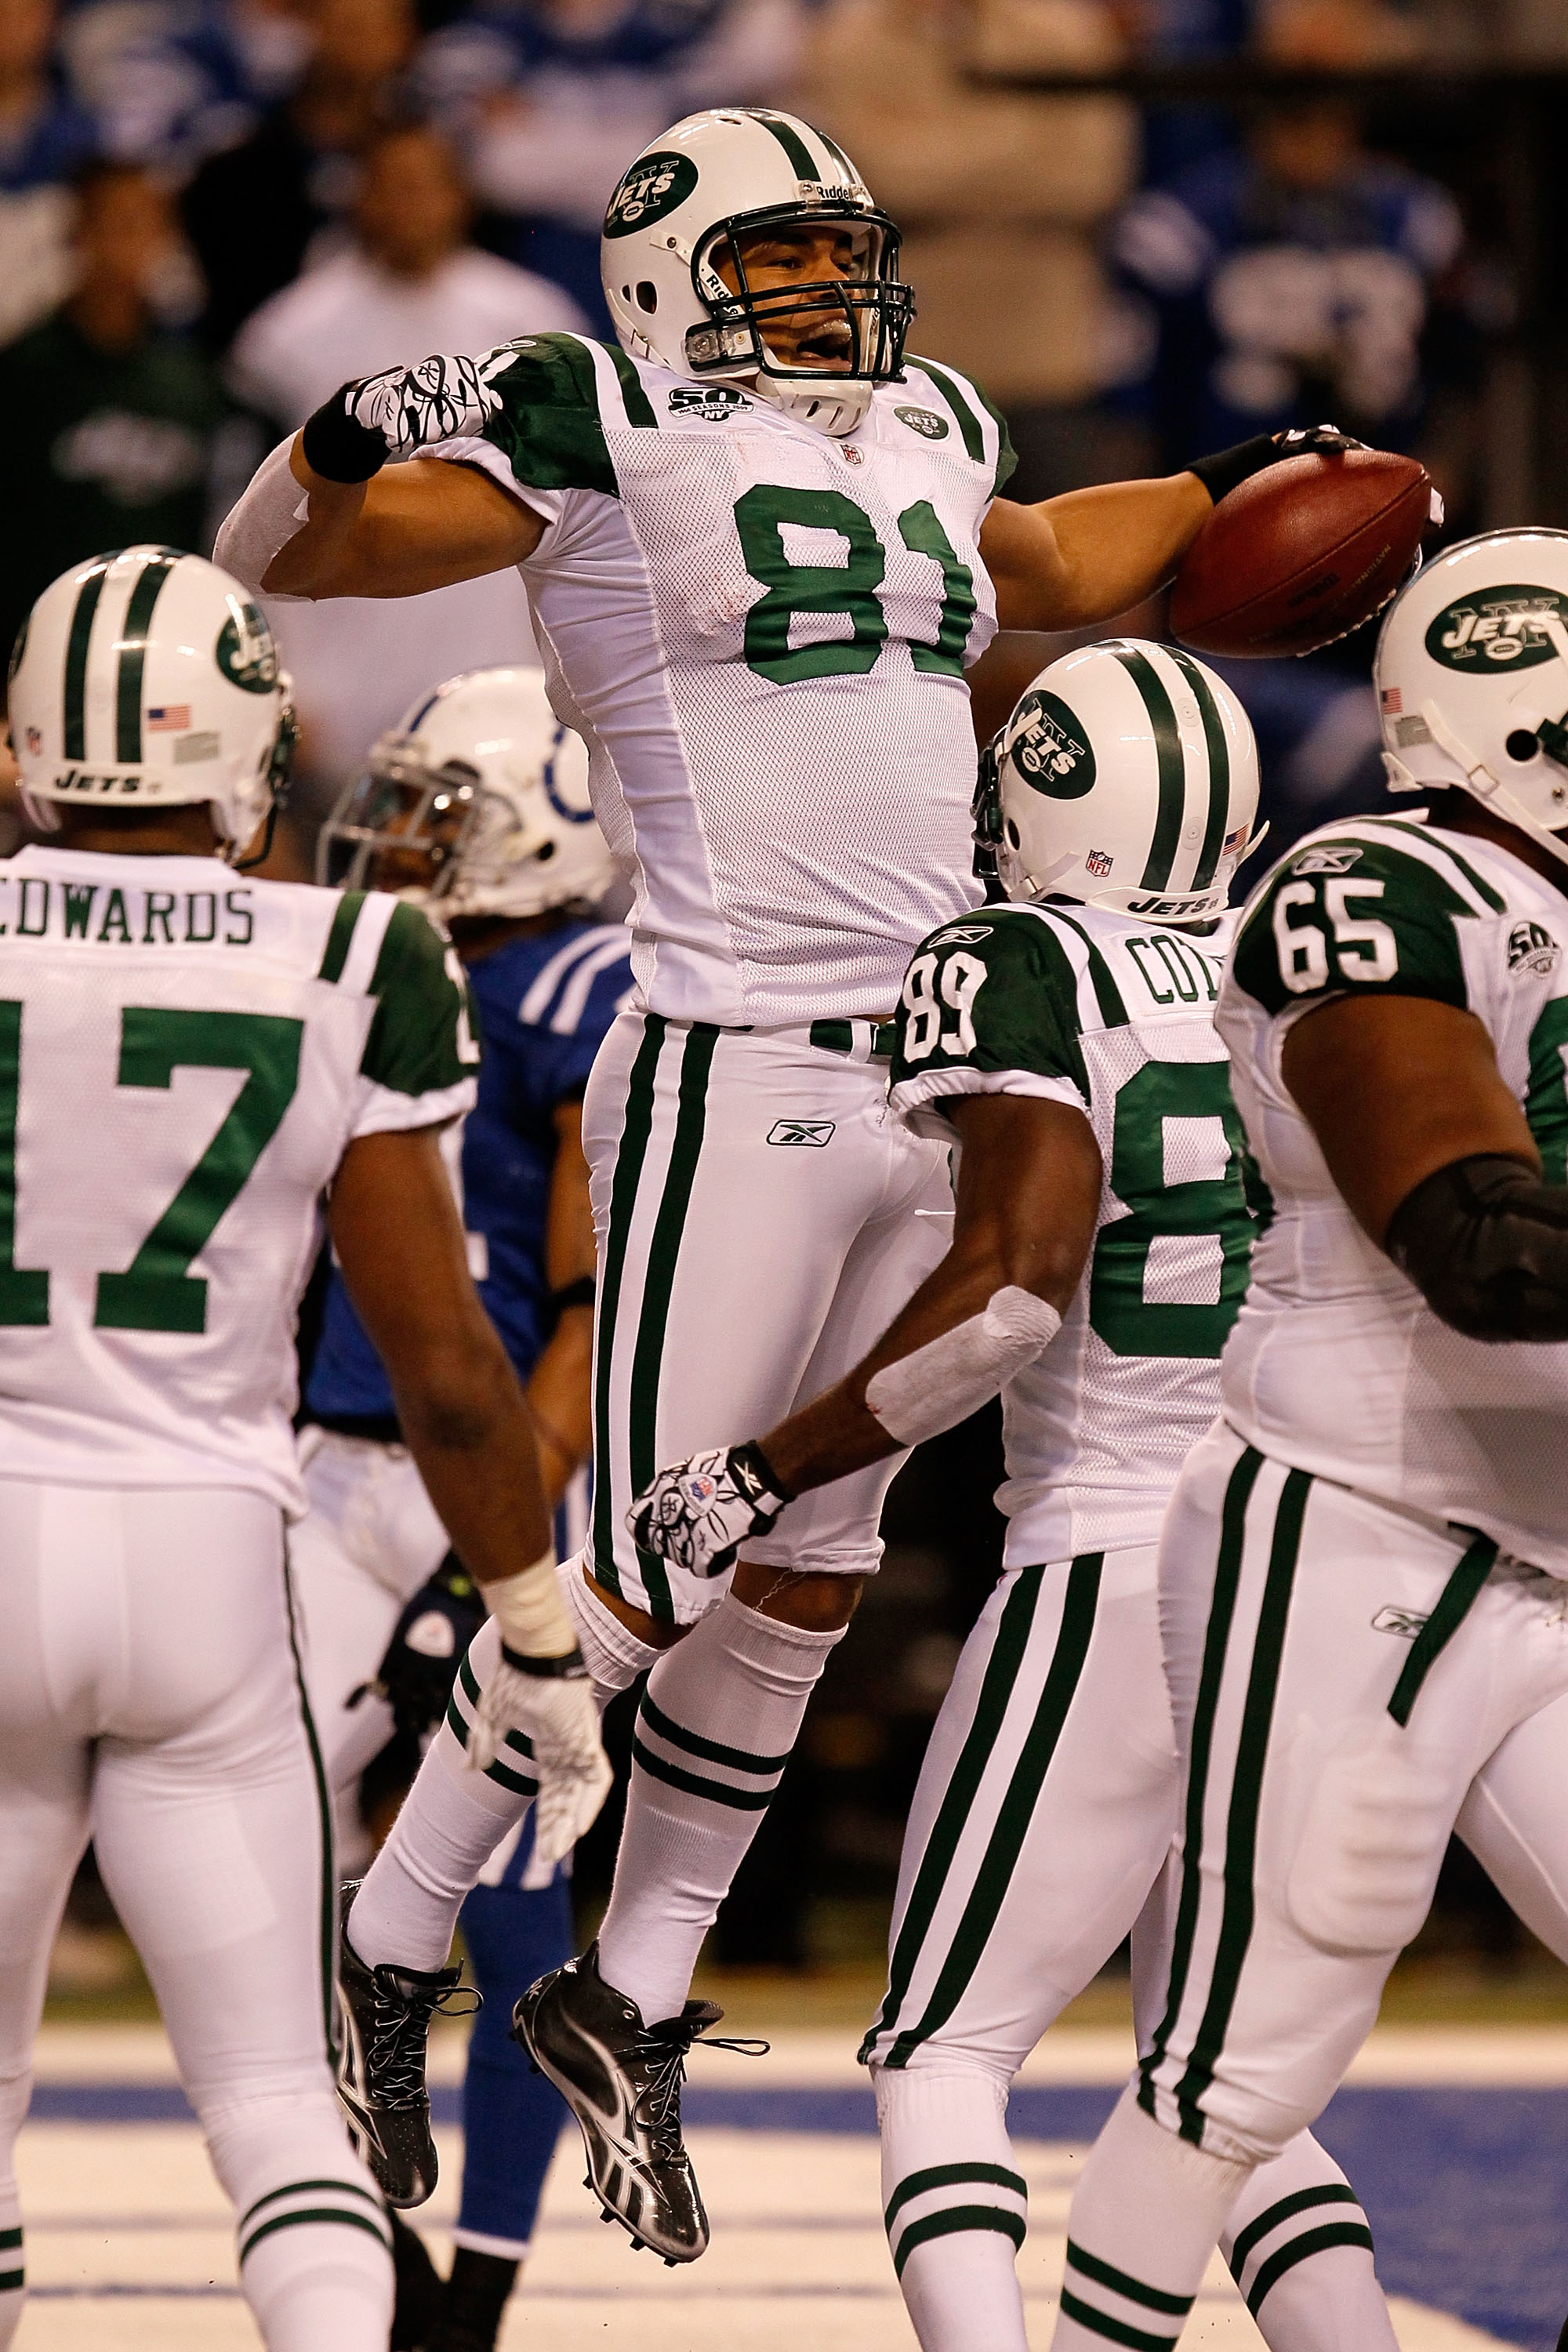 INDIANAPOLIS - JANUARY 24:  Dustin Keller #81 of the New York Jets celebrates his touchdown in the second quarter with teammates Jerricho Cotchery #89 and Braylon Edwards #17 while playing against the Indianapolis Colts during the AFC Championship Game at